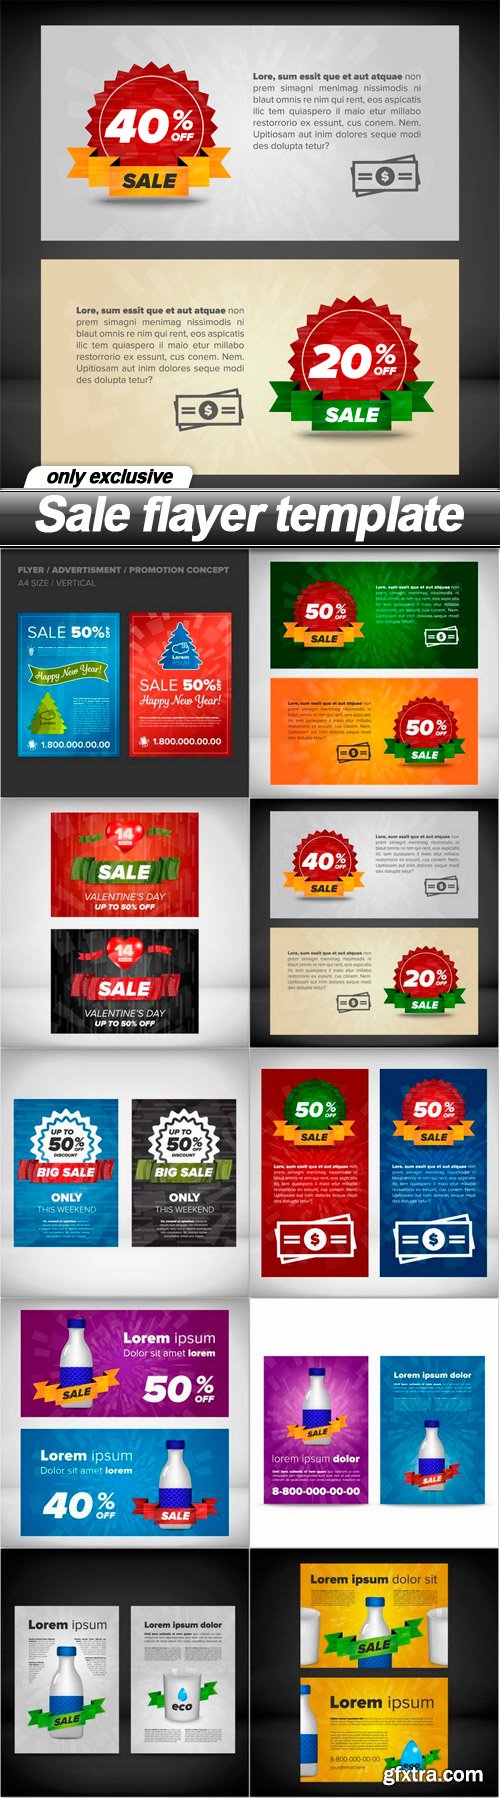 Sale flayer template - 10 EPS